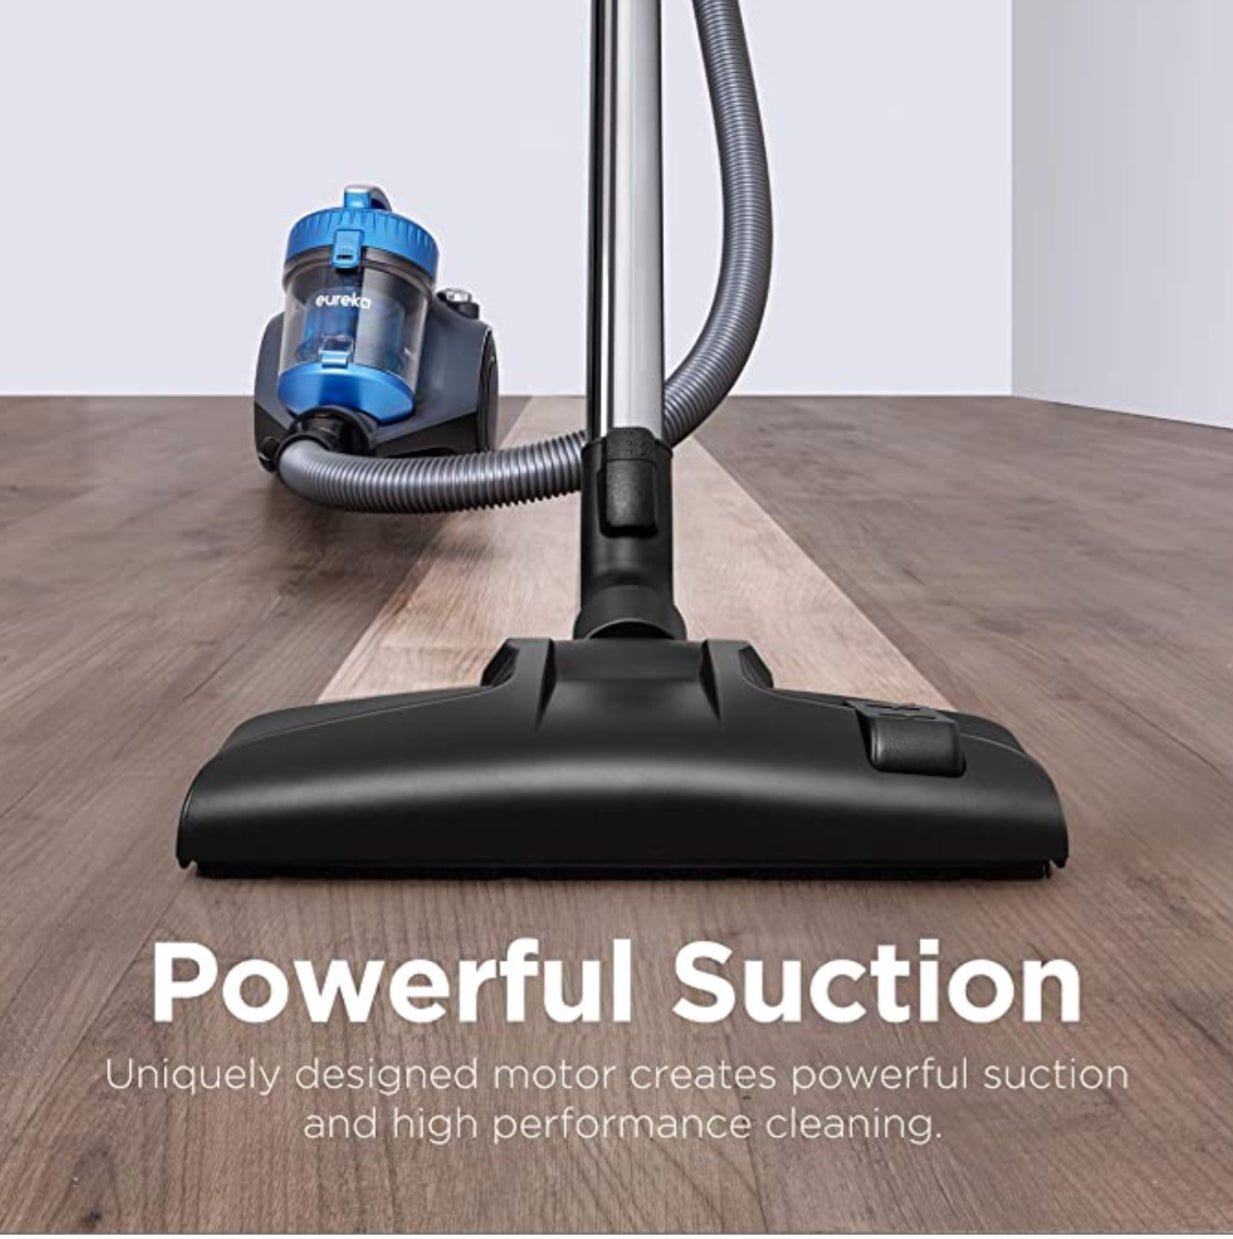 WhirlWind Bagless Canister Vacuum Cleaner